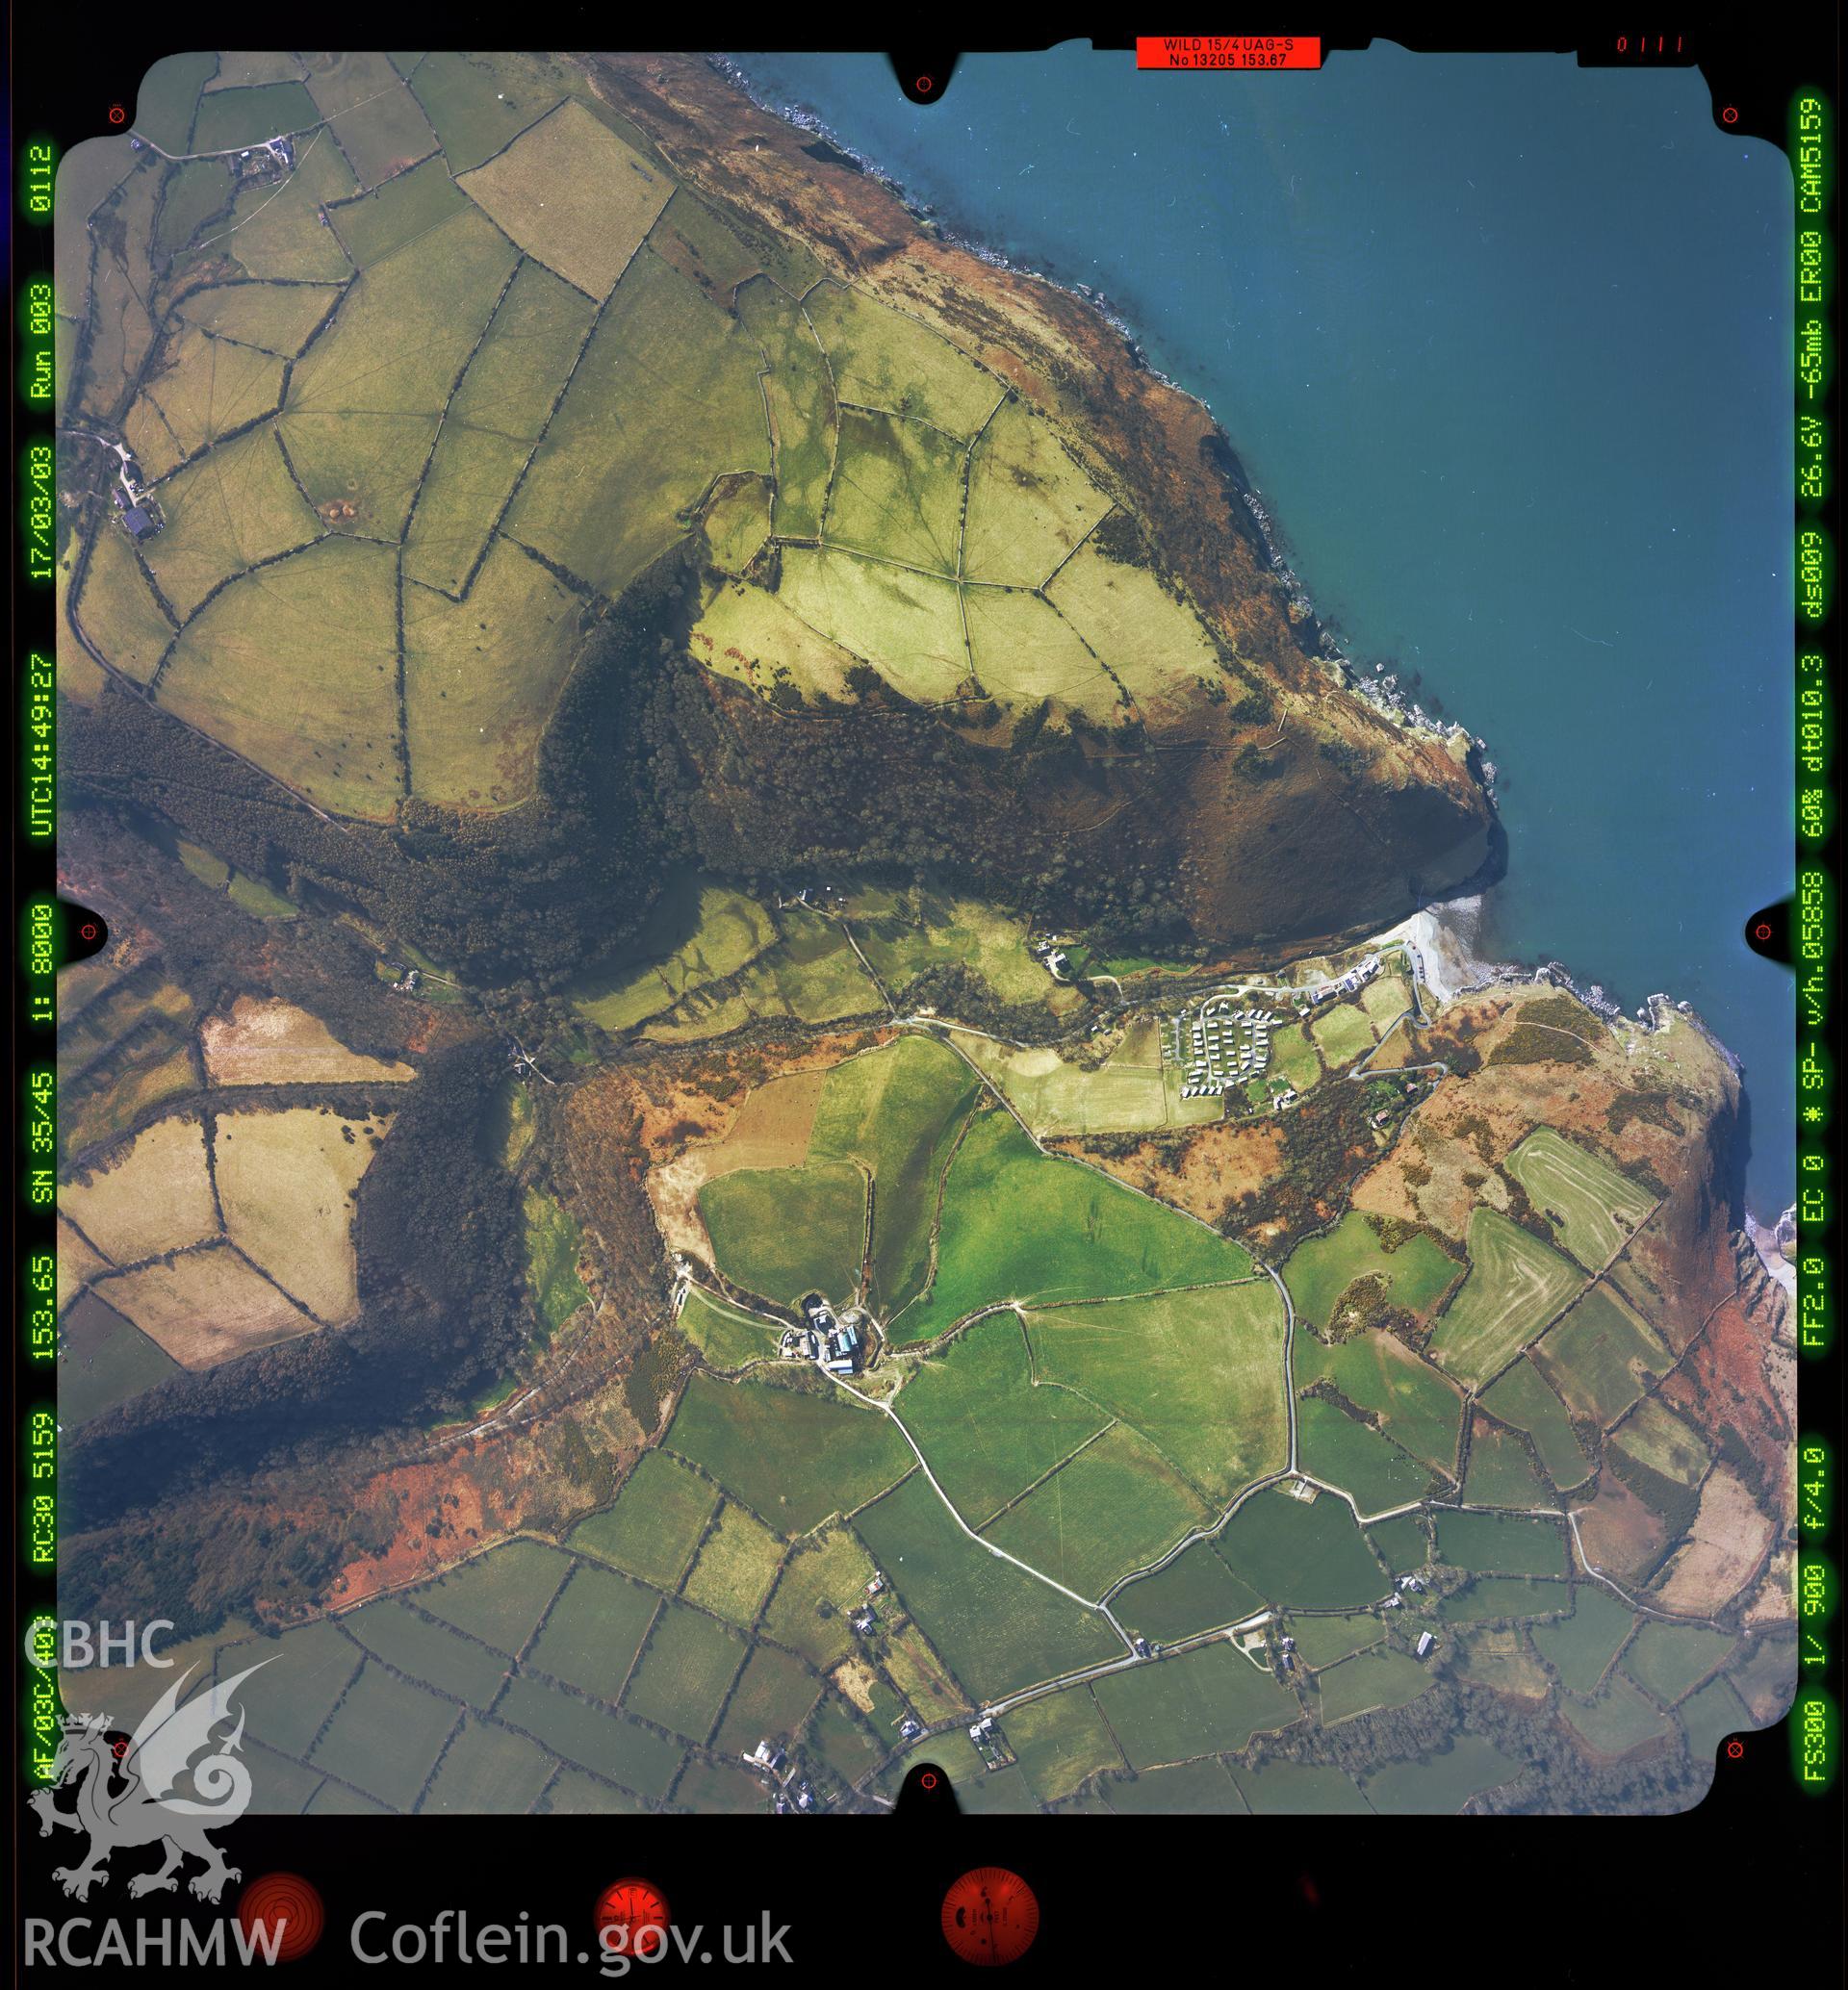 Digitized copy of a colour aerial photograph showing Cwmtydu, taken by Ordnance Survey, 2003.